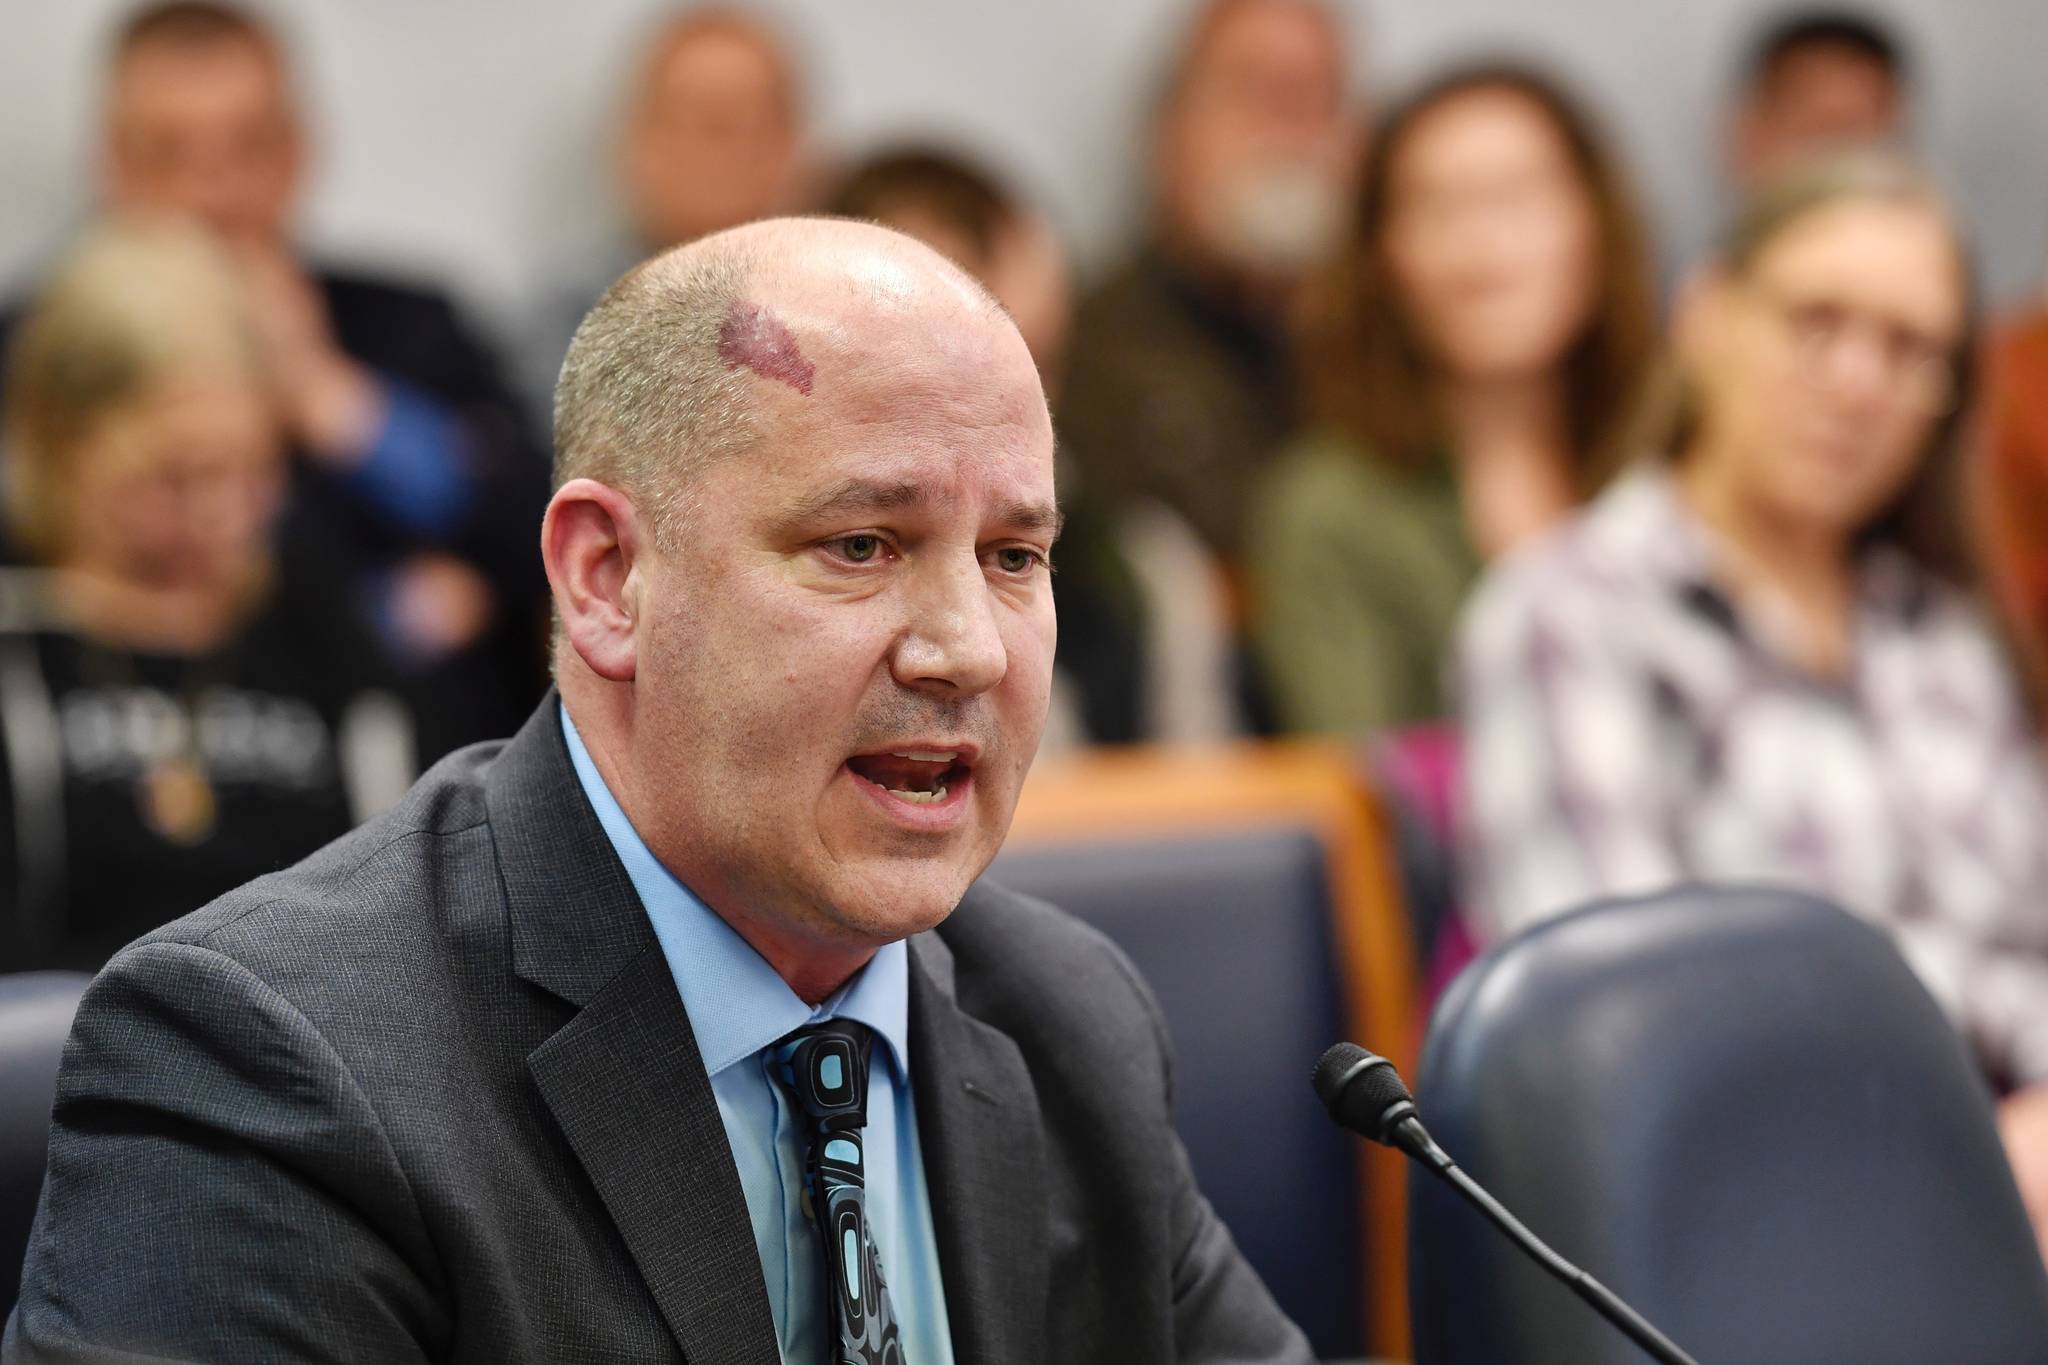 Jason Brune, Commissioner designee for the Department of Conservation, speaks to the House Resources Committee at the Capitol on Friday, March 14, 2019. (Michael Penn | Juneau Empire)